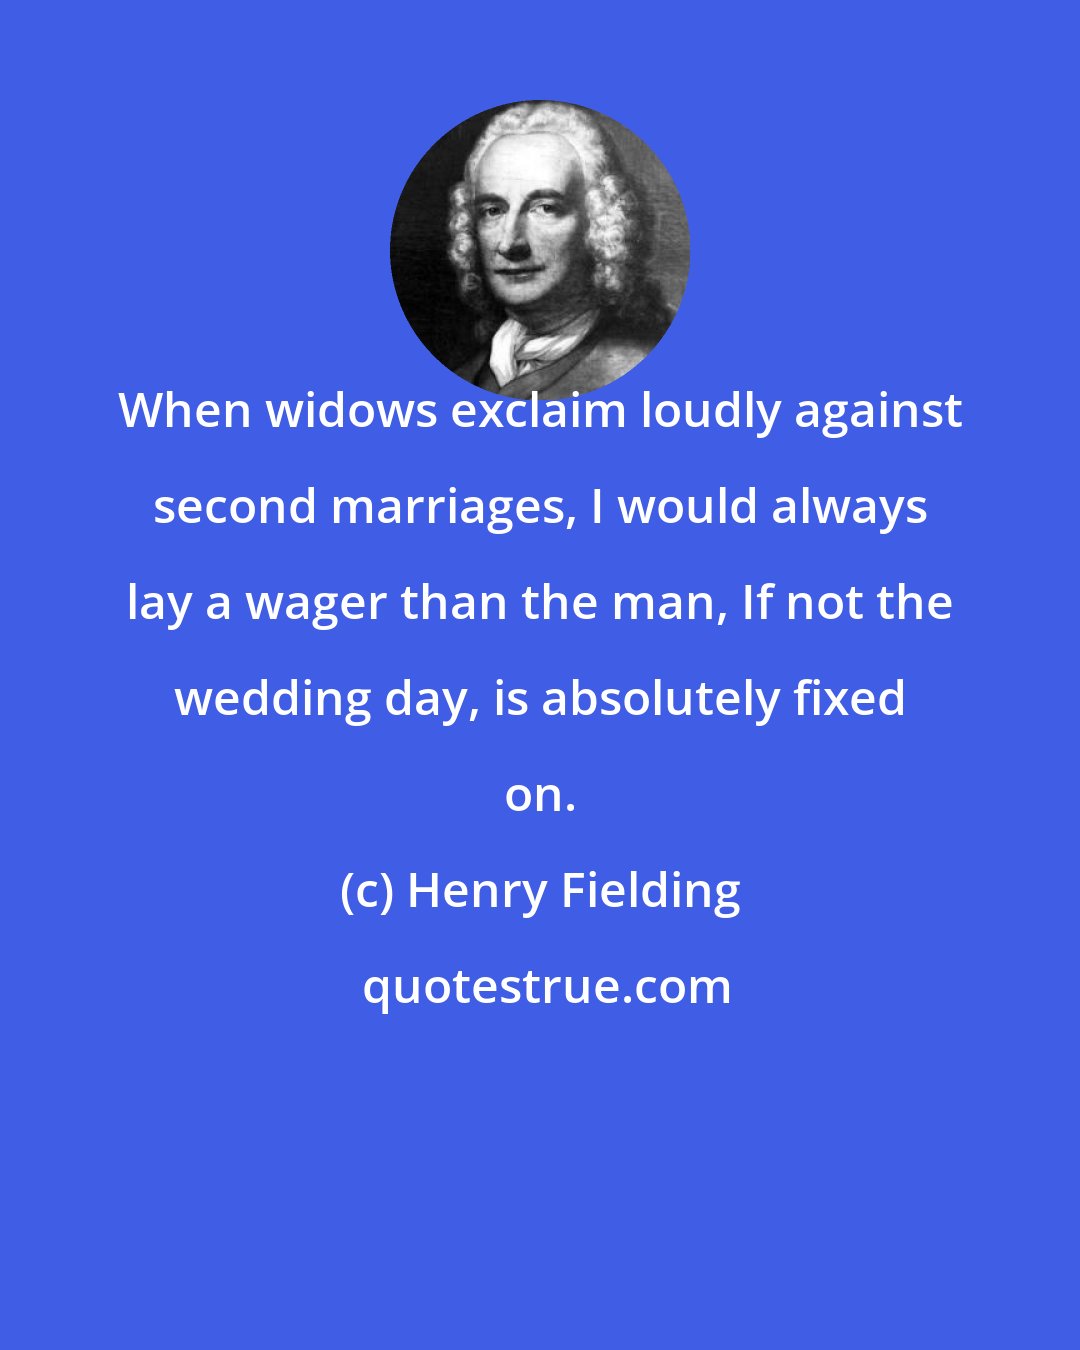 Henry Fielding: When widows exclaim loudly against second marriages, I would always lay a wager than the man, If not the wedding day, is absolutely fixed on.